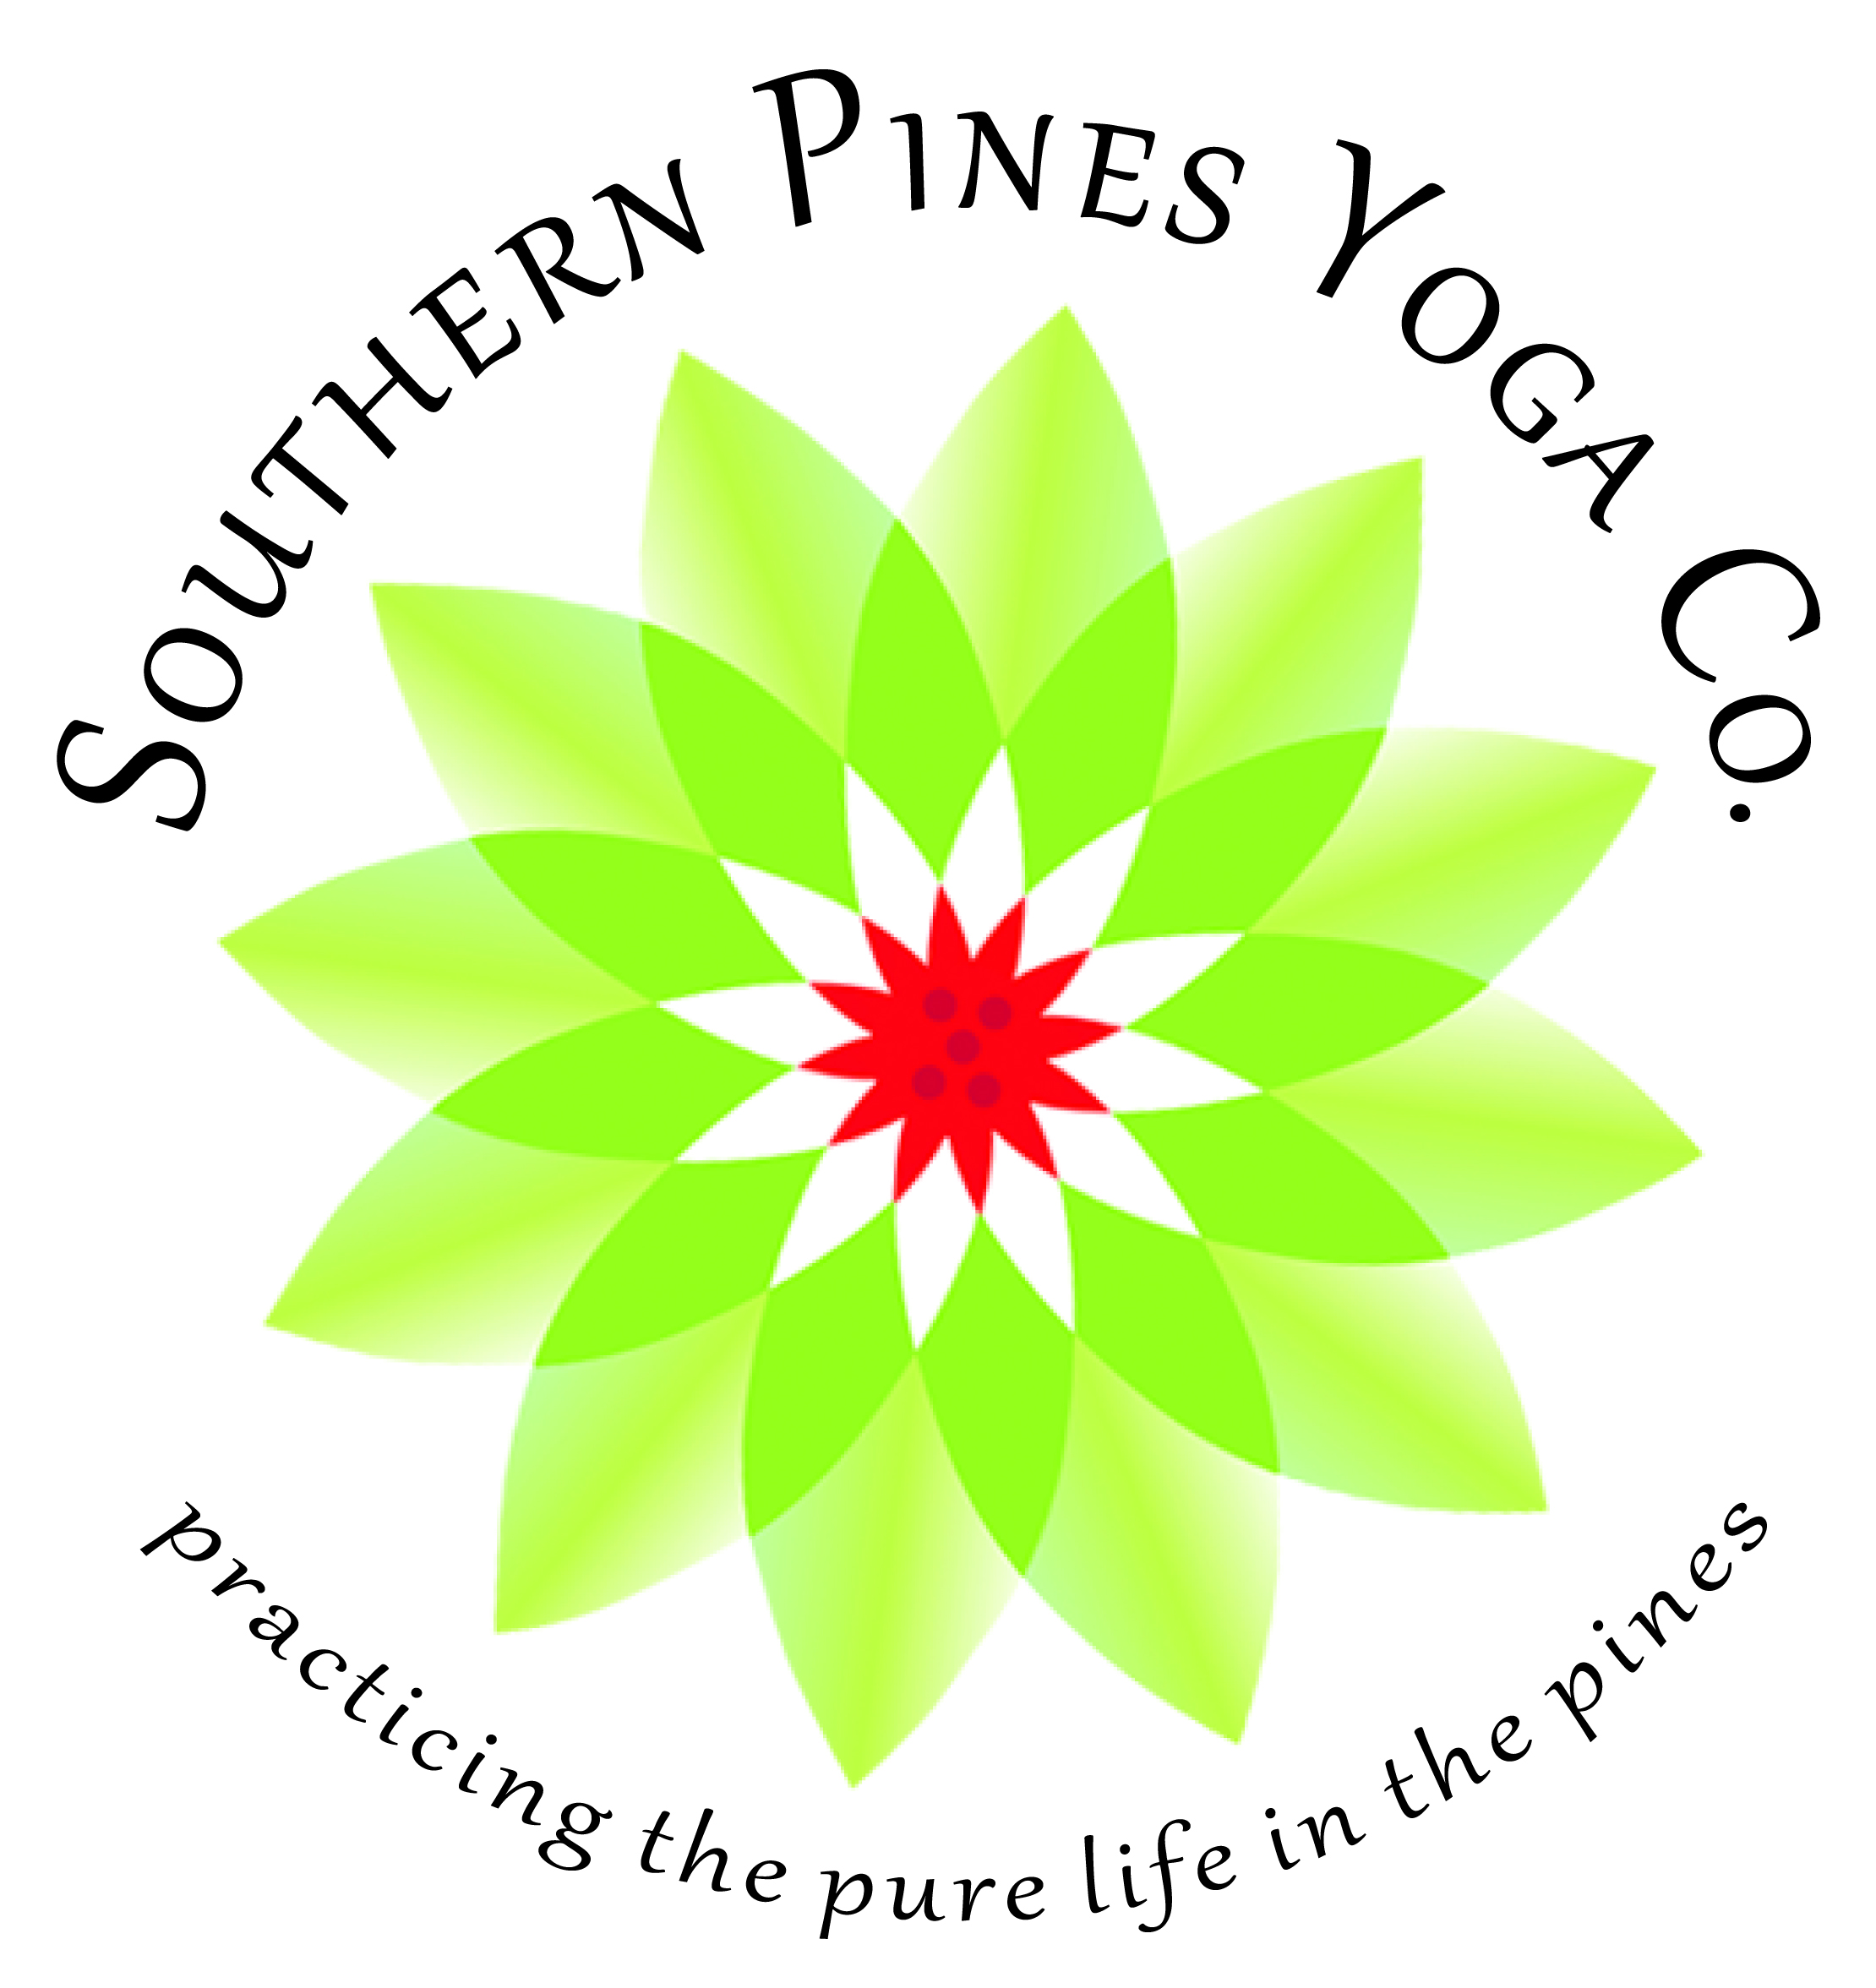 Southern Pines Yoga Co.